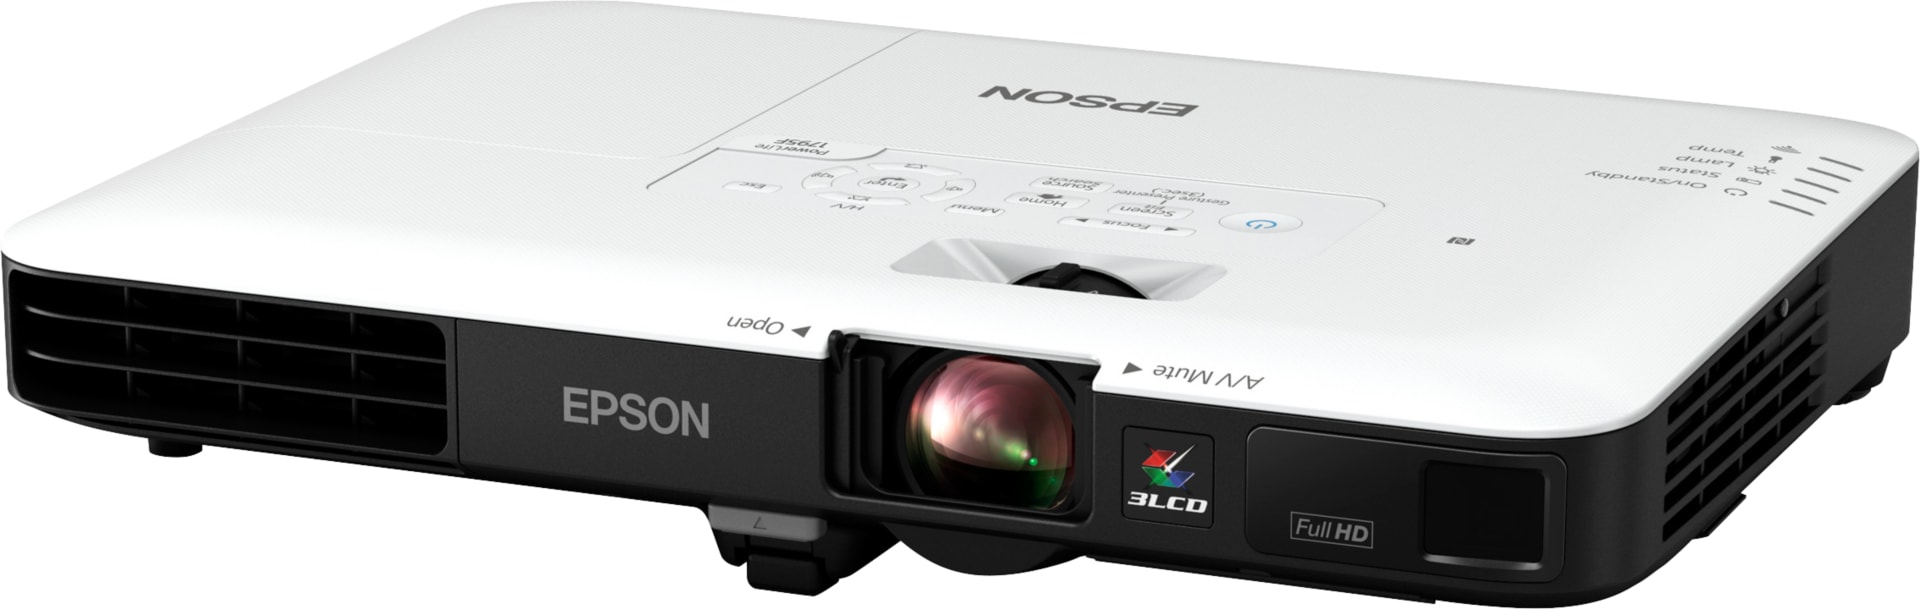 Epson PowerLite 1795F - 3LCD projector - portable - Wi-Fi ...